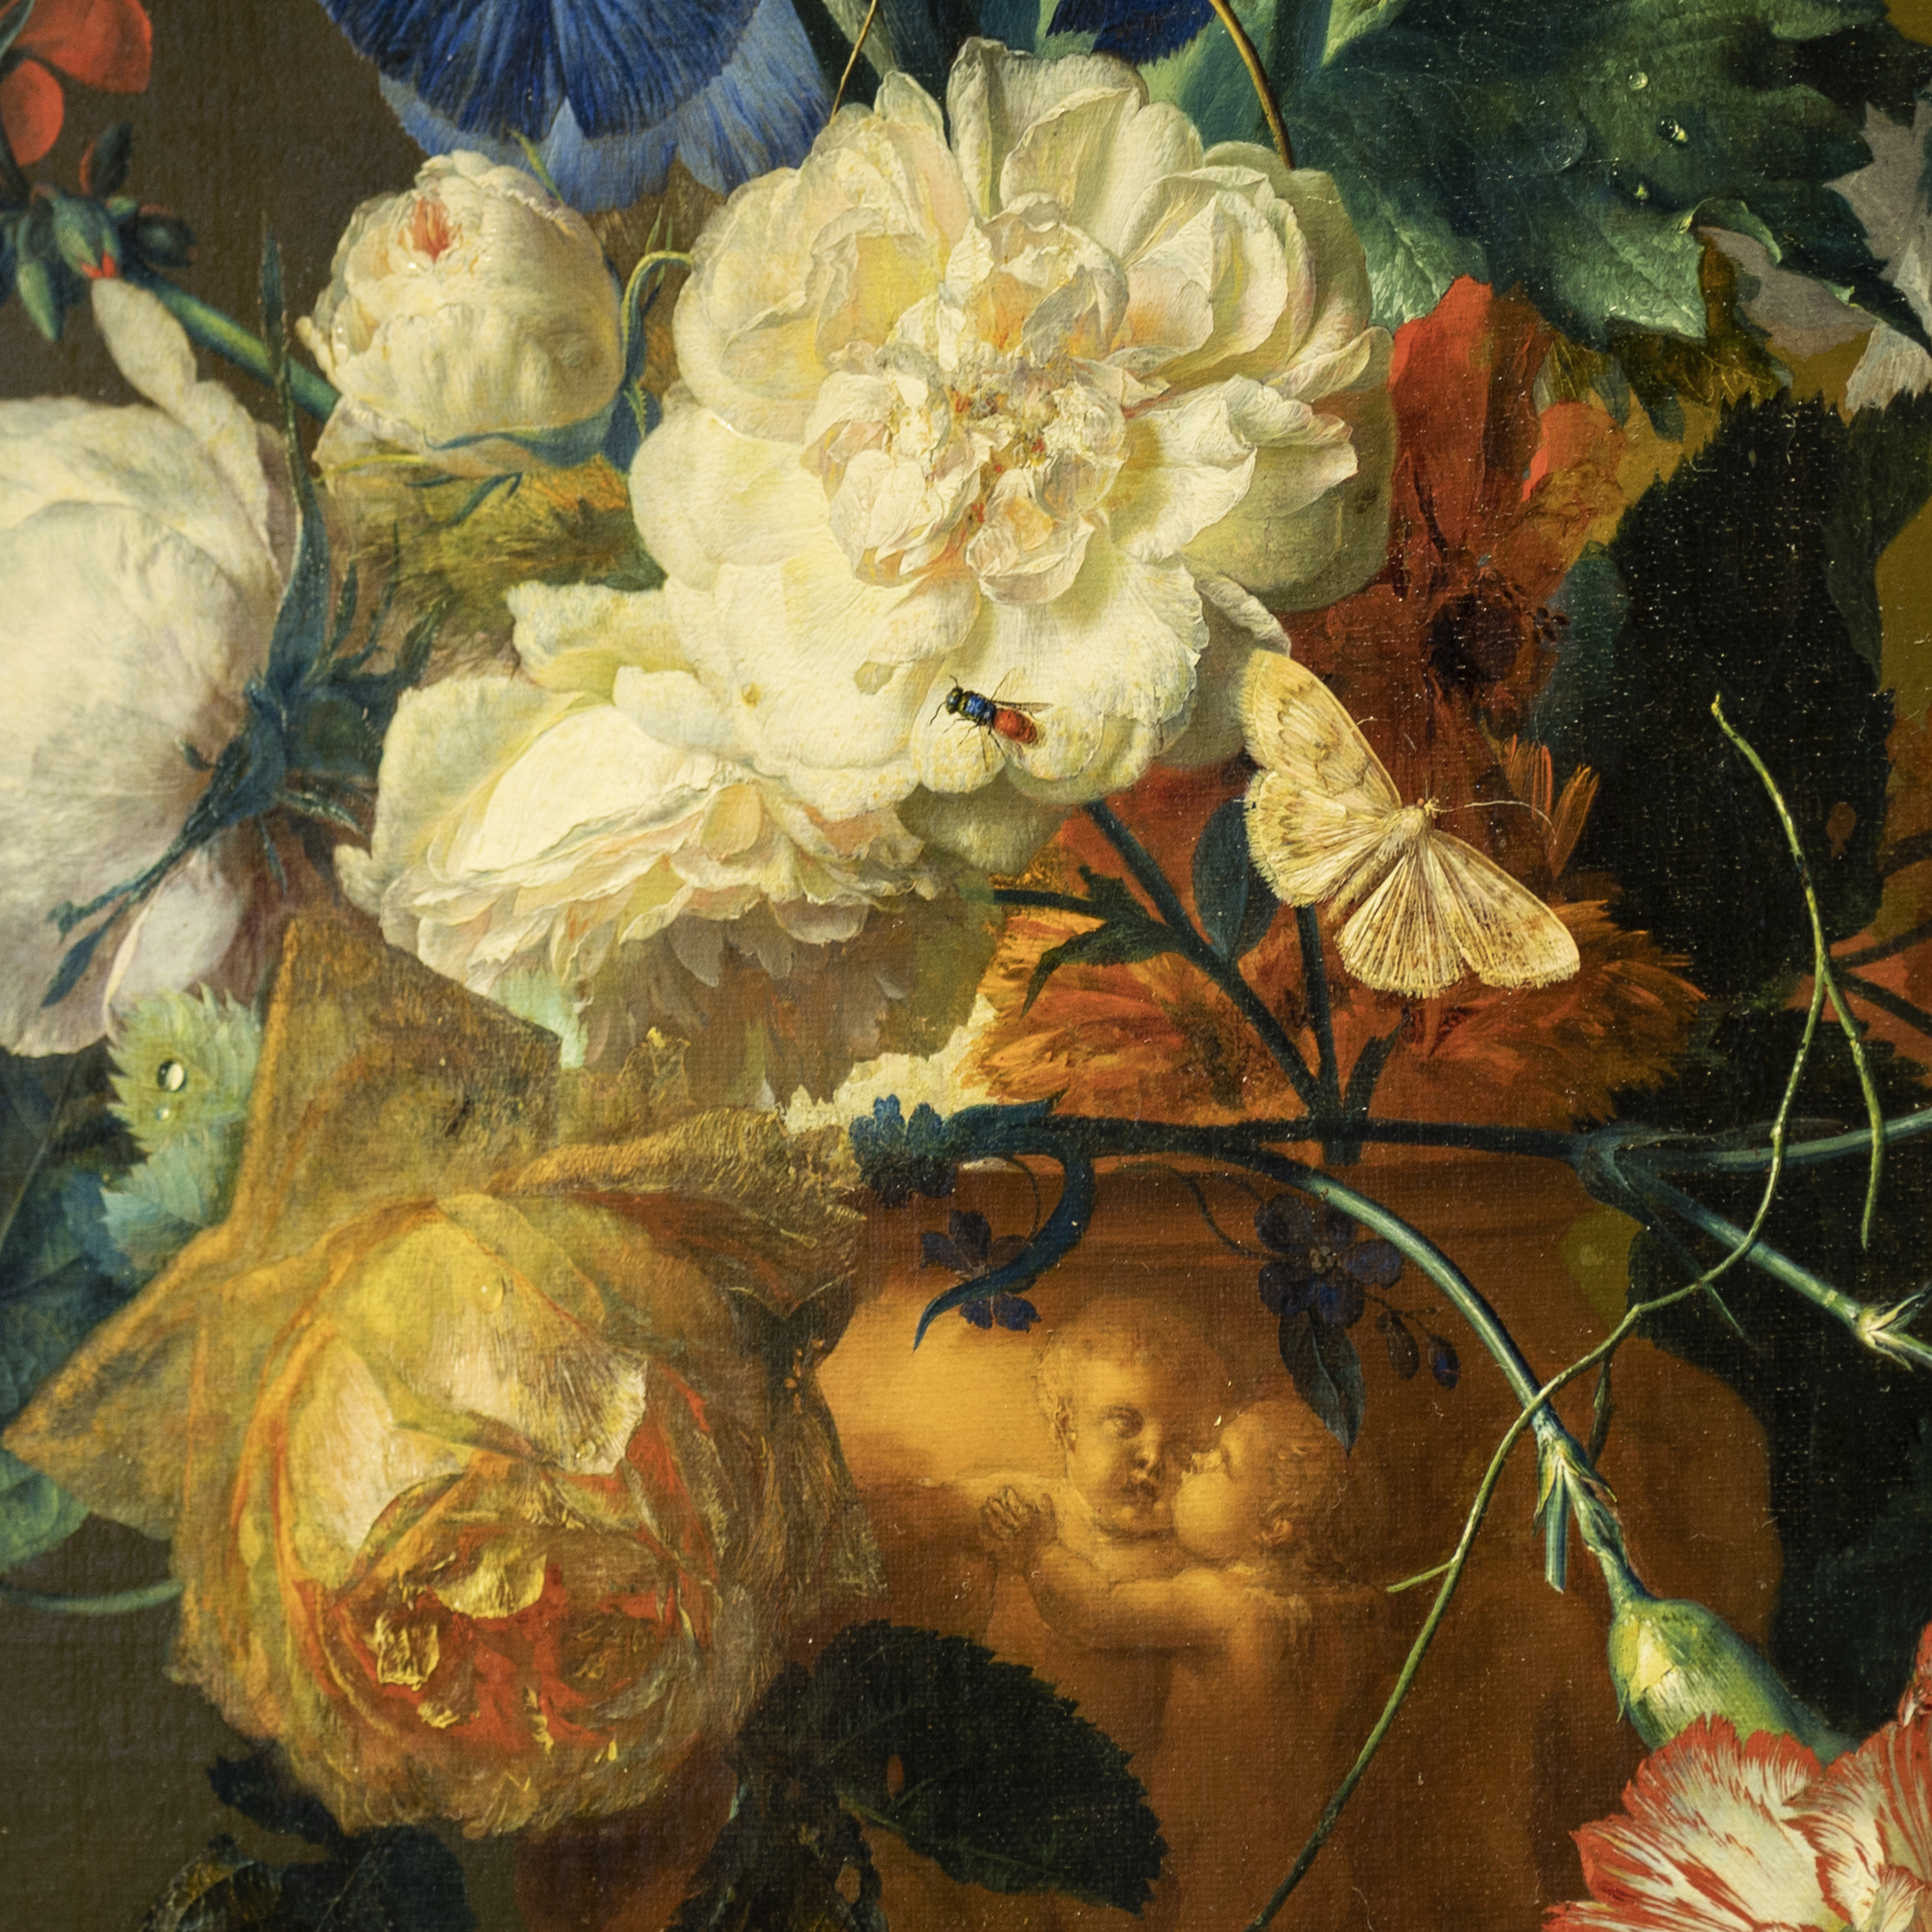 "The Flower Vase" by Jan van Huysum has returned to Pitti Palace!